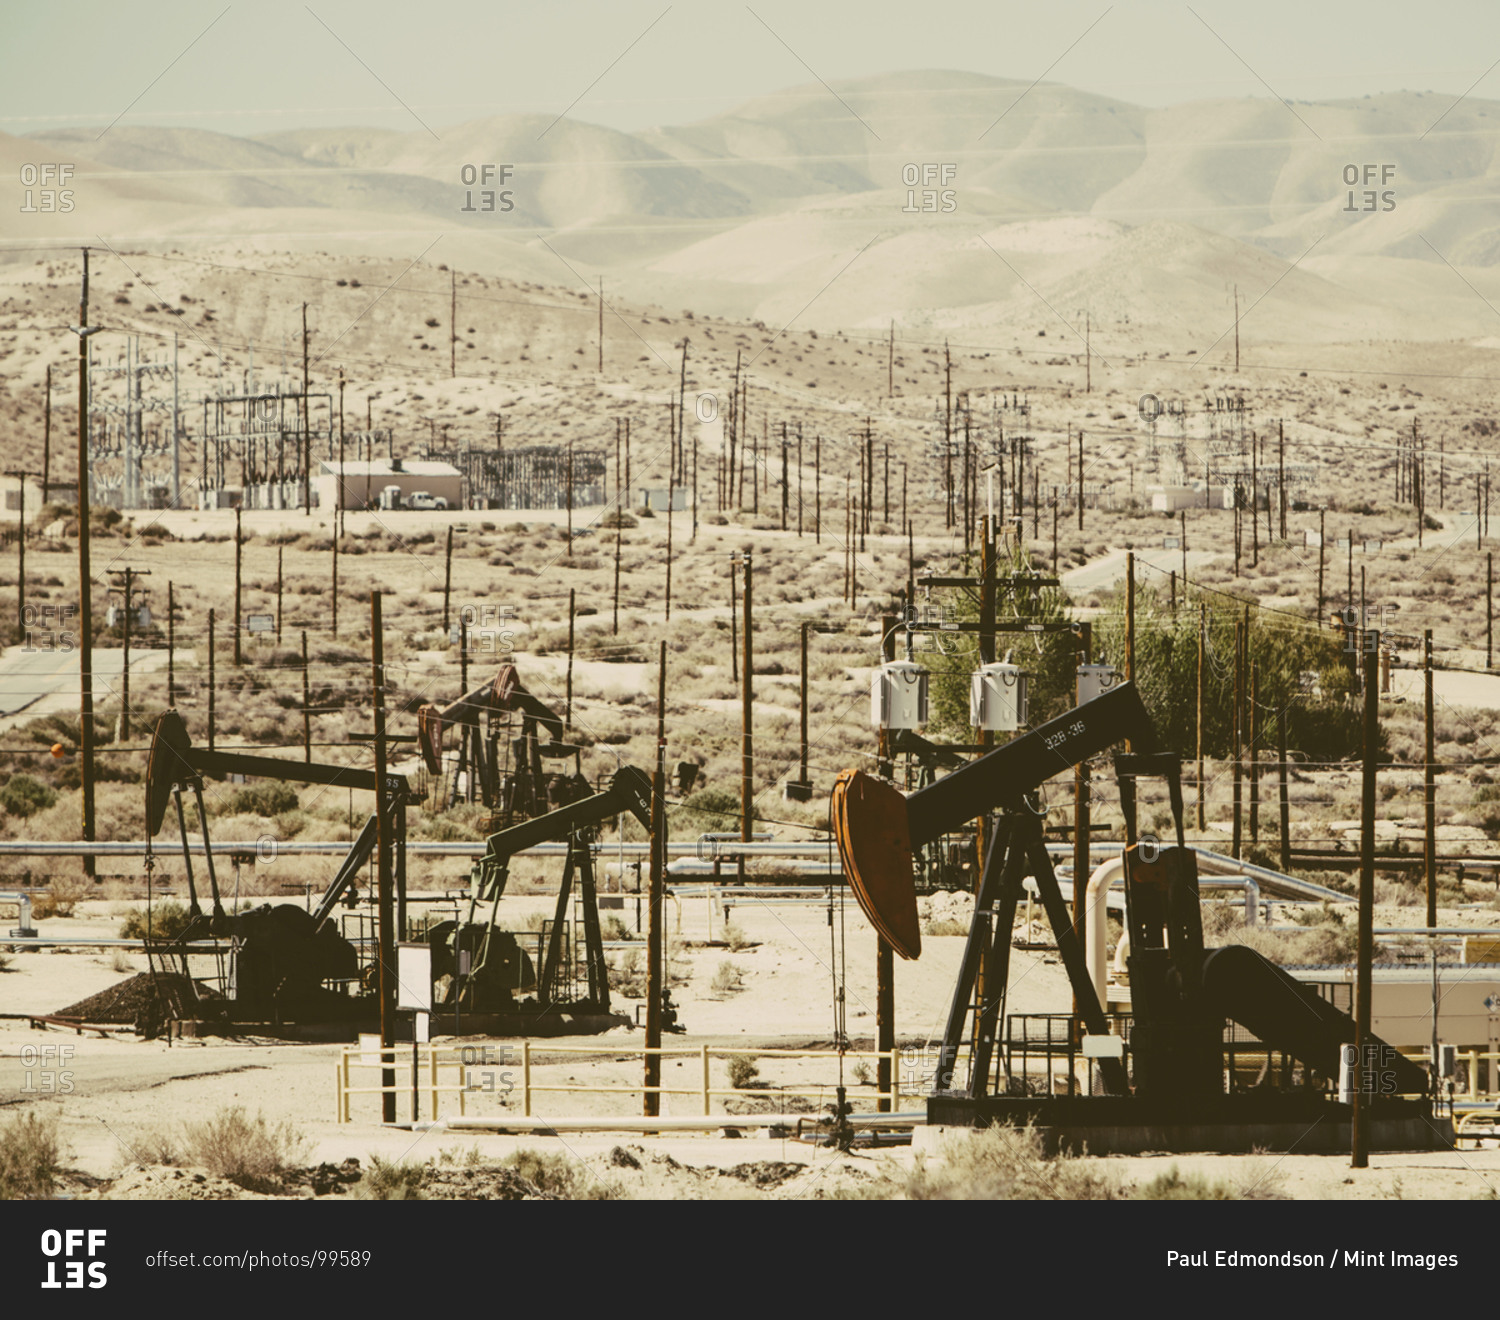 At the Midway-Sunset oil fields outside Bakersfield, crude oil is extracted from Monterey Shale